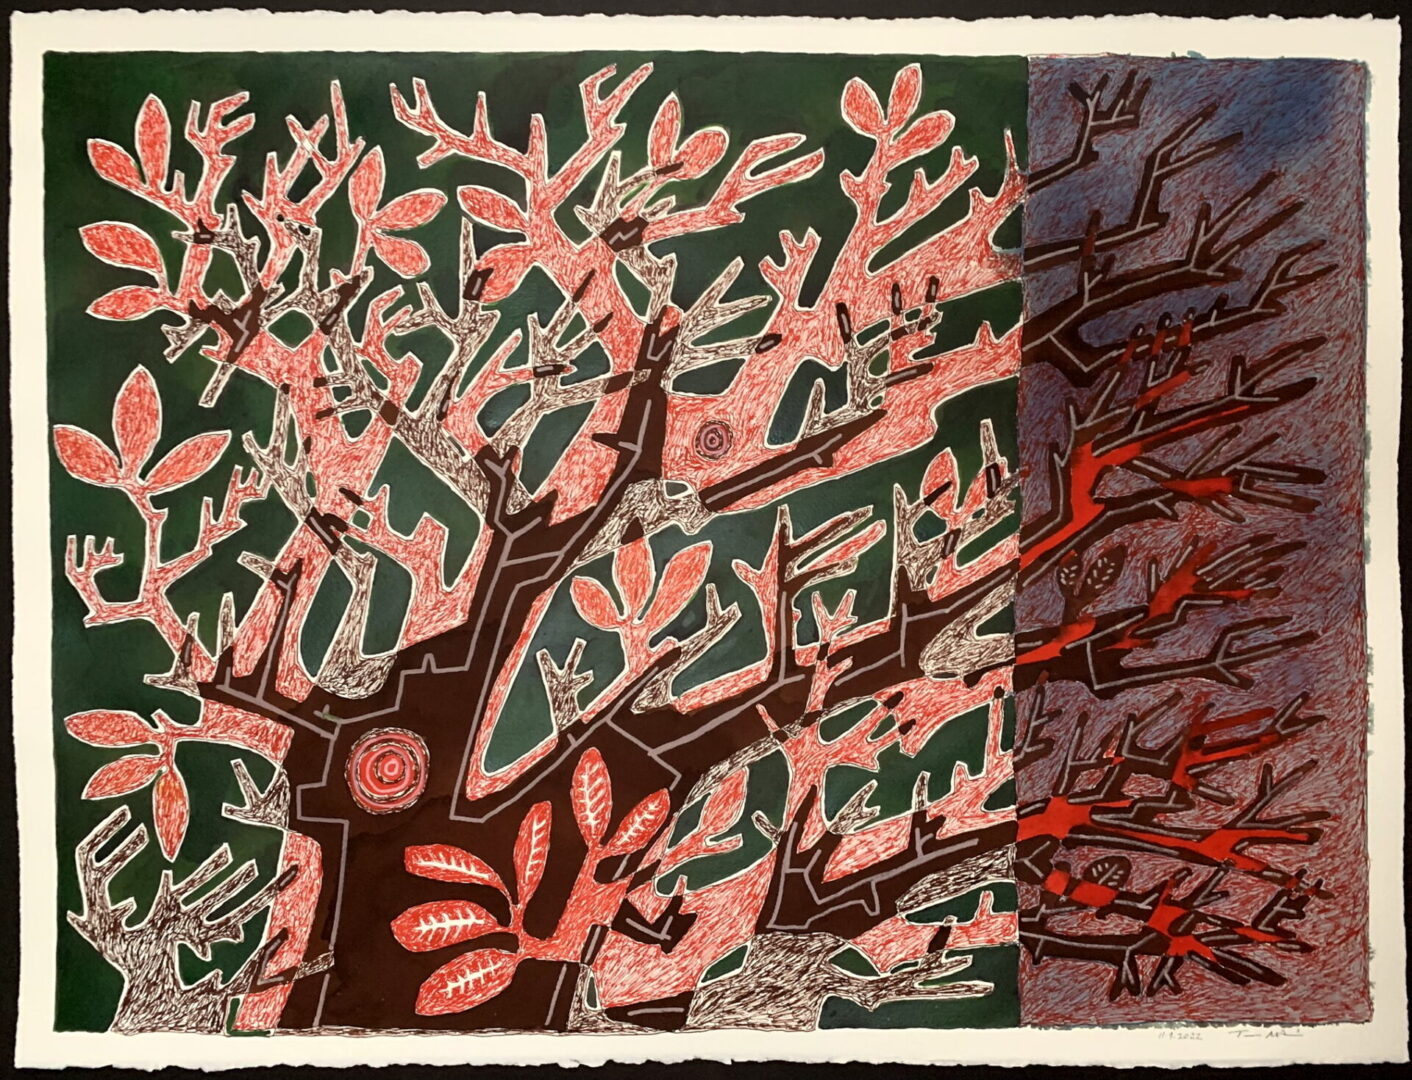 A painting of trees with leaves and branches.